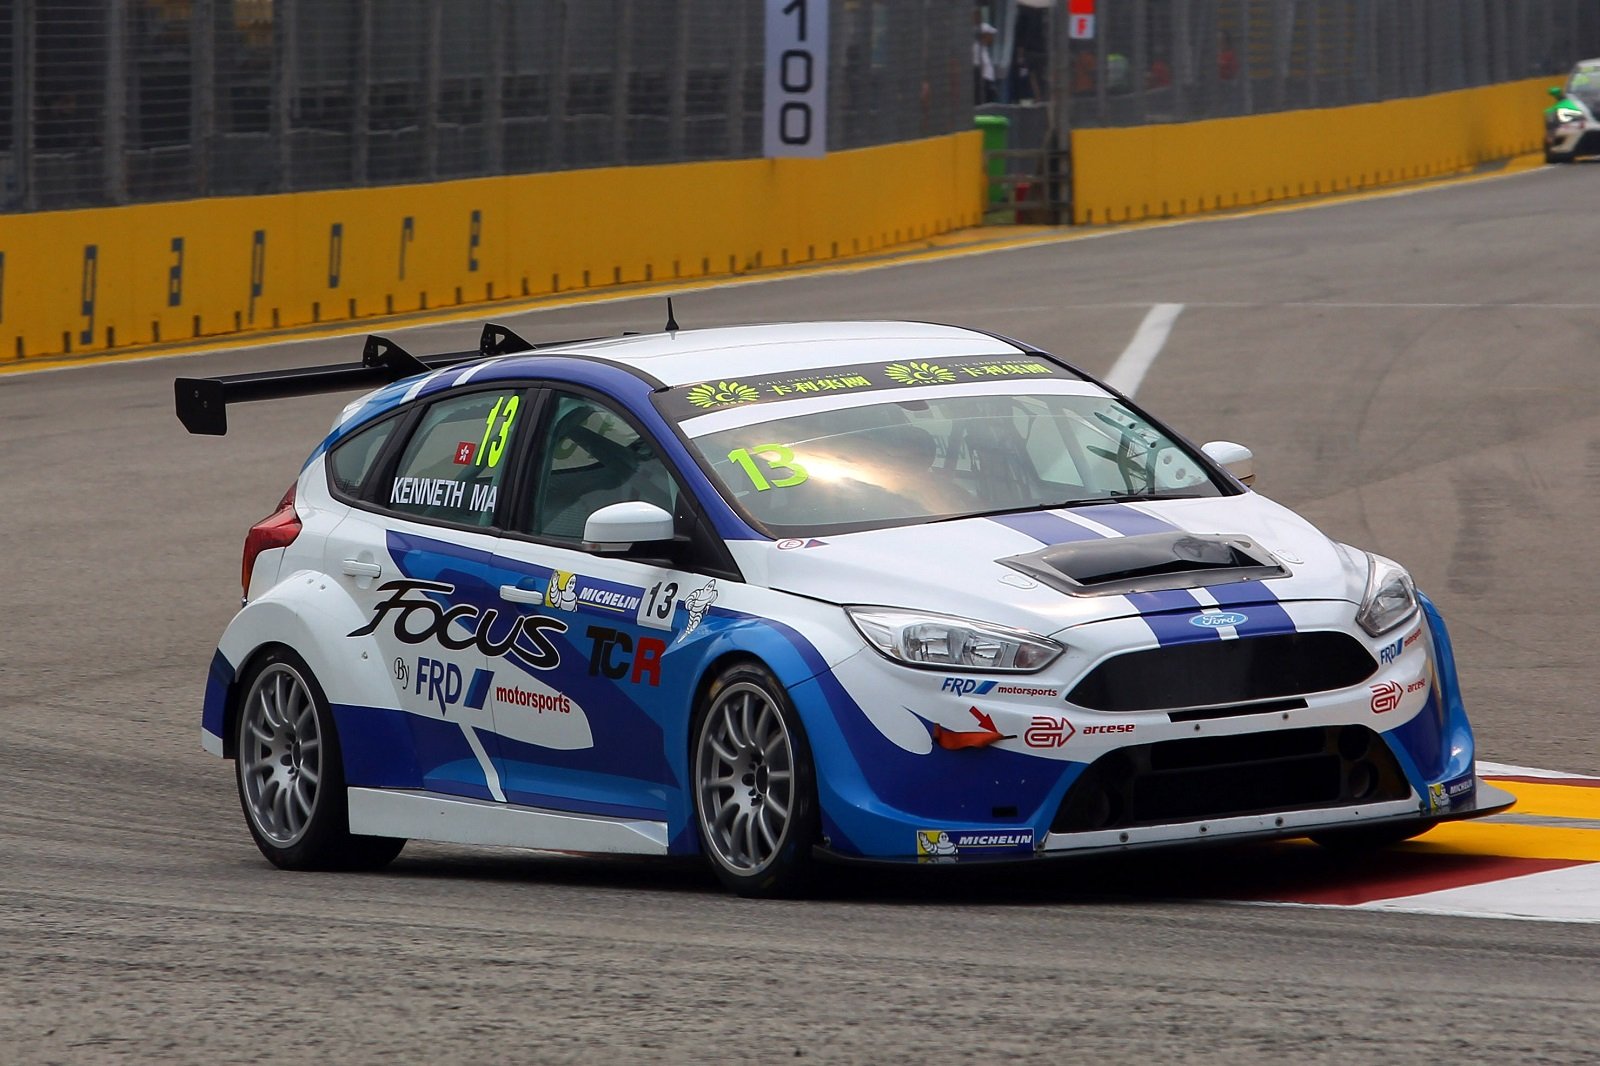 2015, Ford, Focus, S t, Cup, Tcr, Rally, Race, Racing Wallpaper